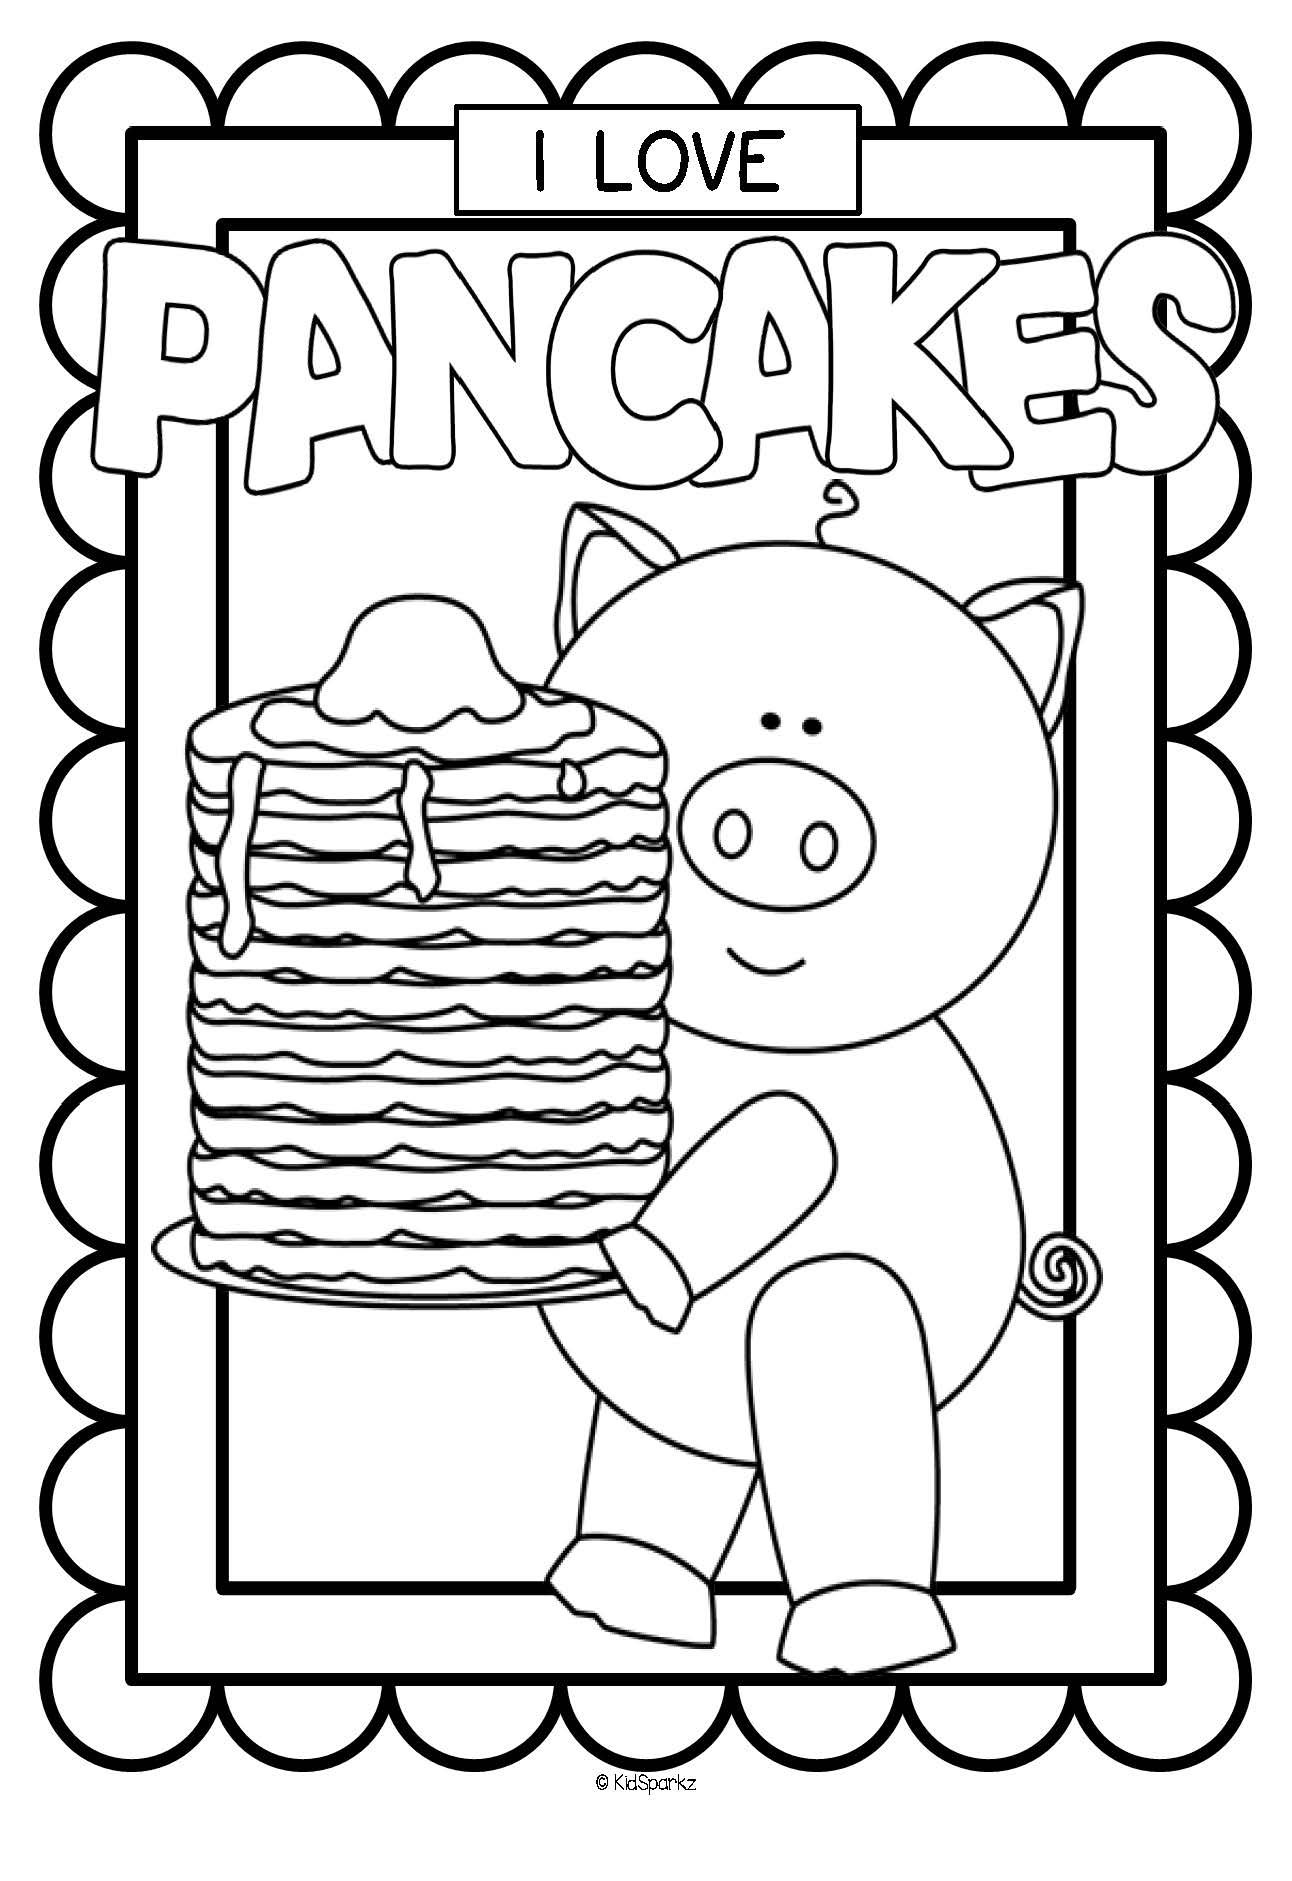 pancake-day-and-i-love-pancakes-posters-coloring-printables-free